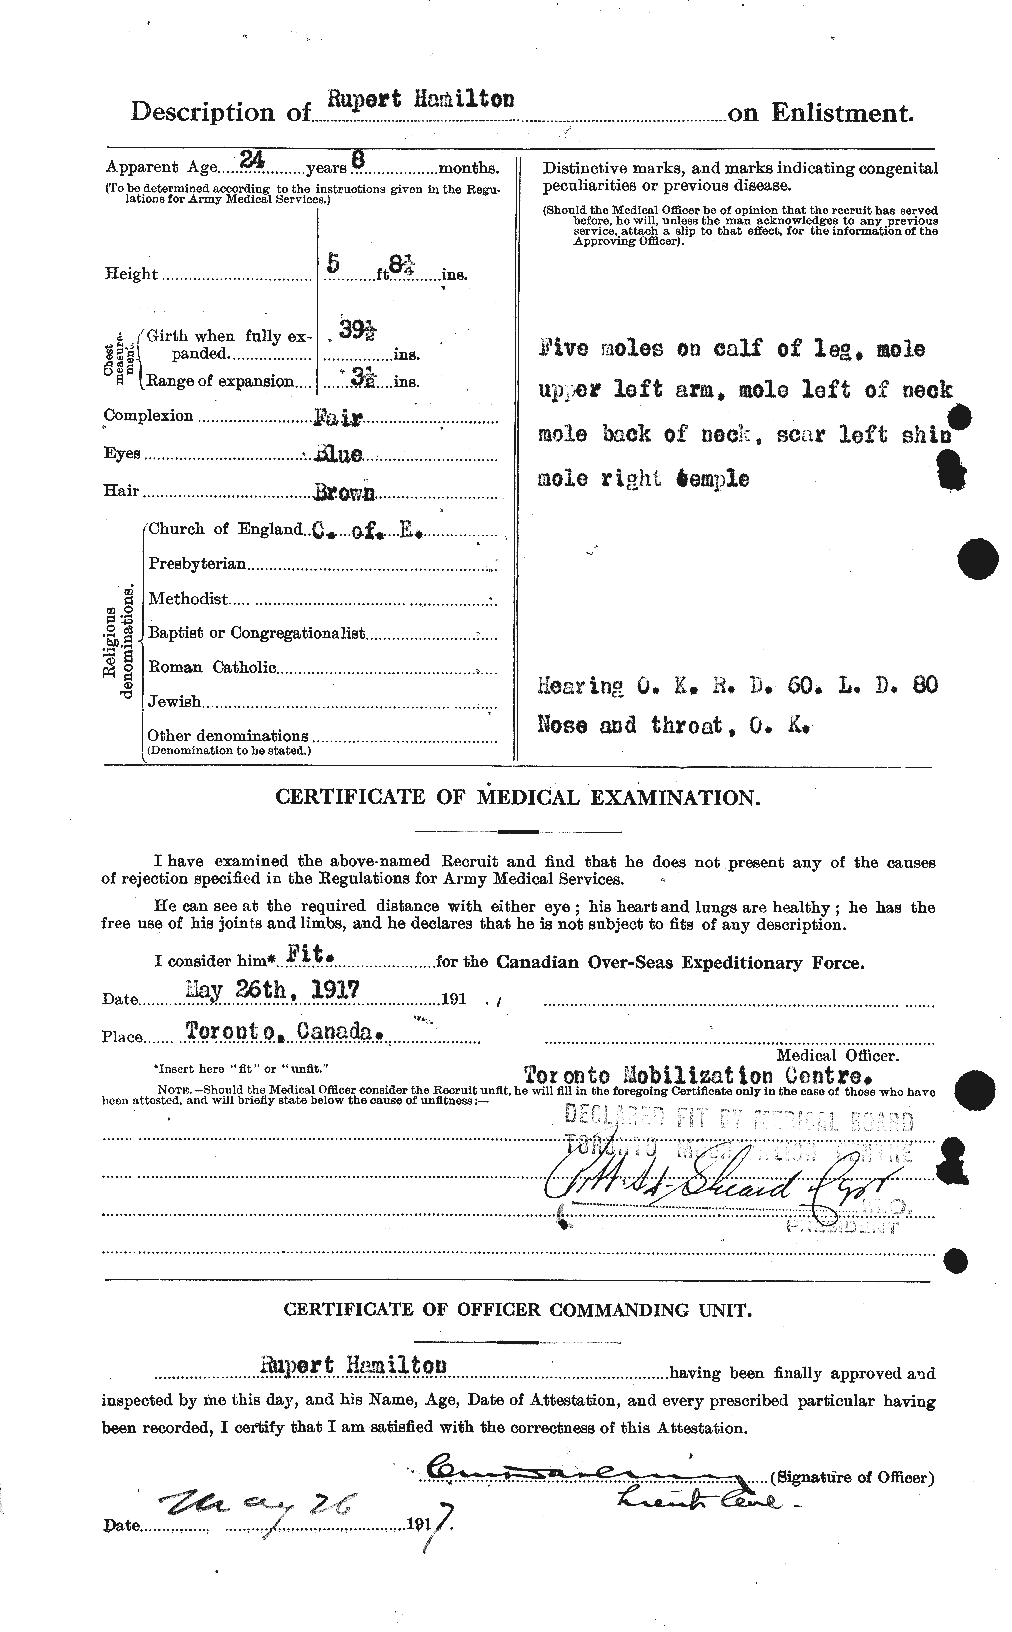 Personnel Records of the First World War - CEF 373293b